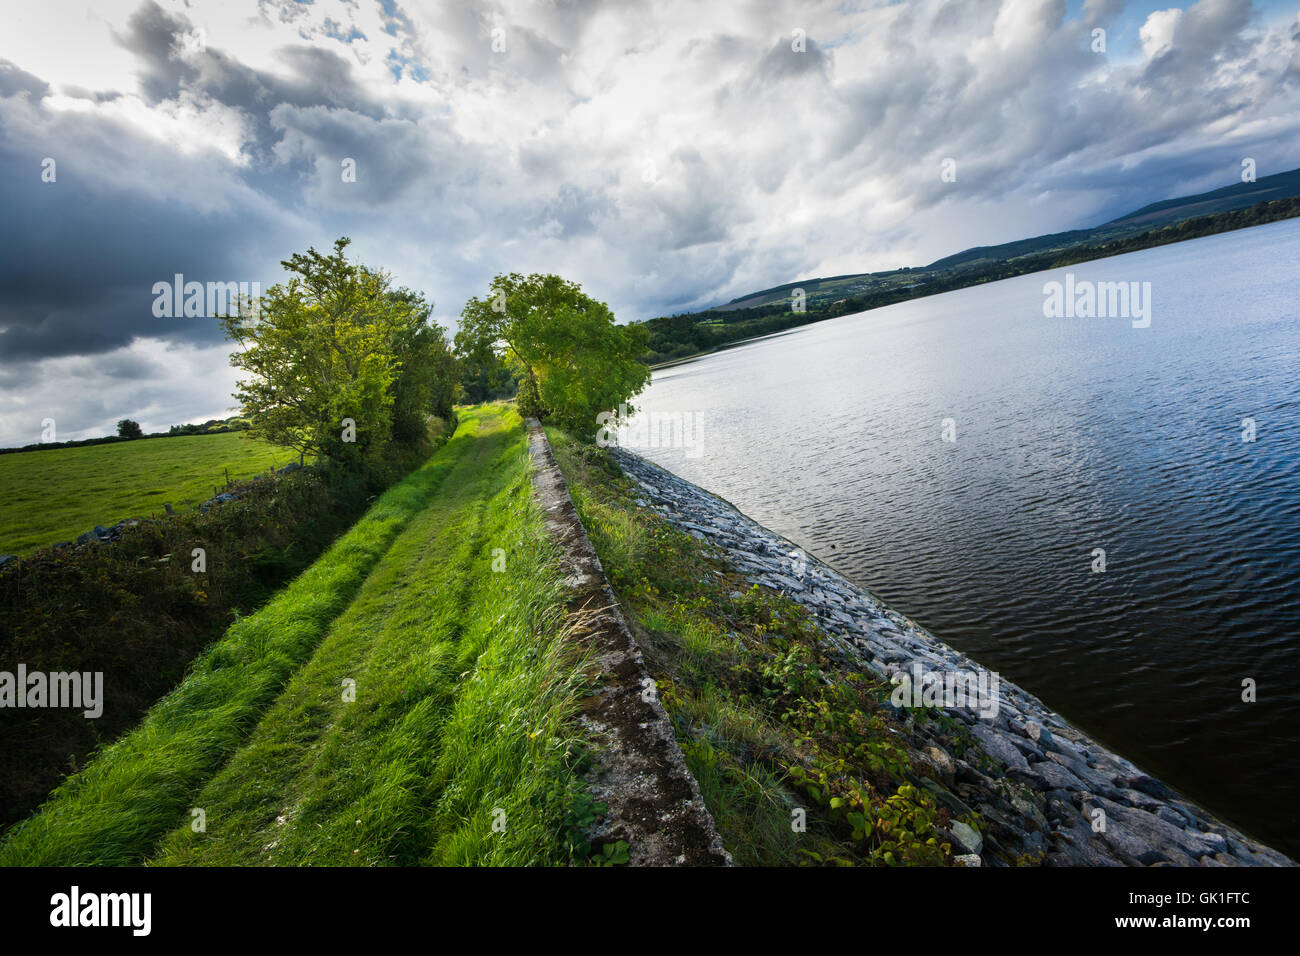 Dramatic Landscape view of Vartry Reservoir in Ireland Stock Photo